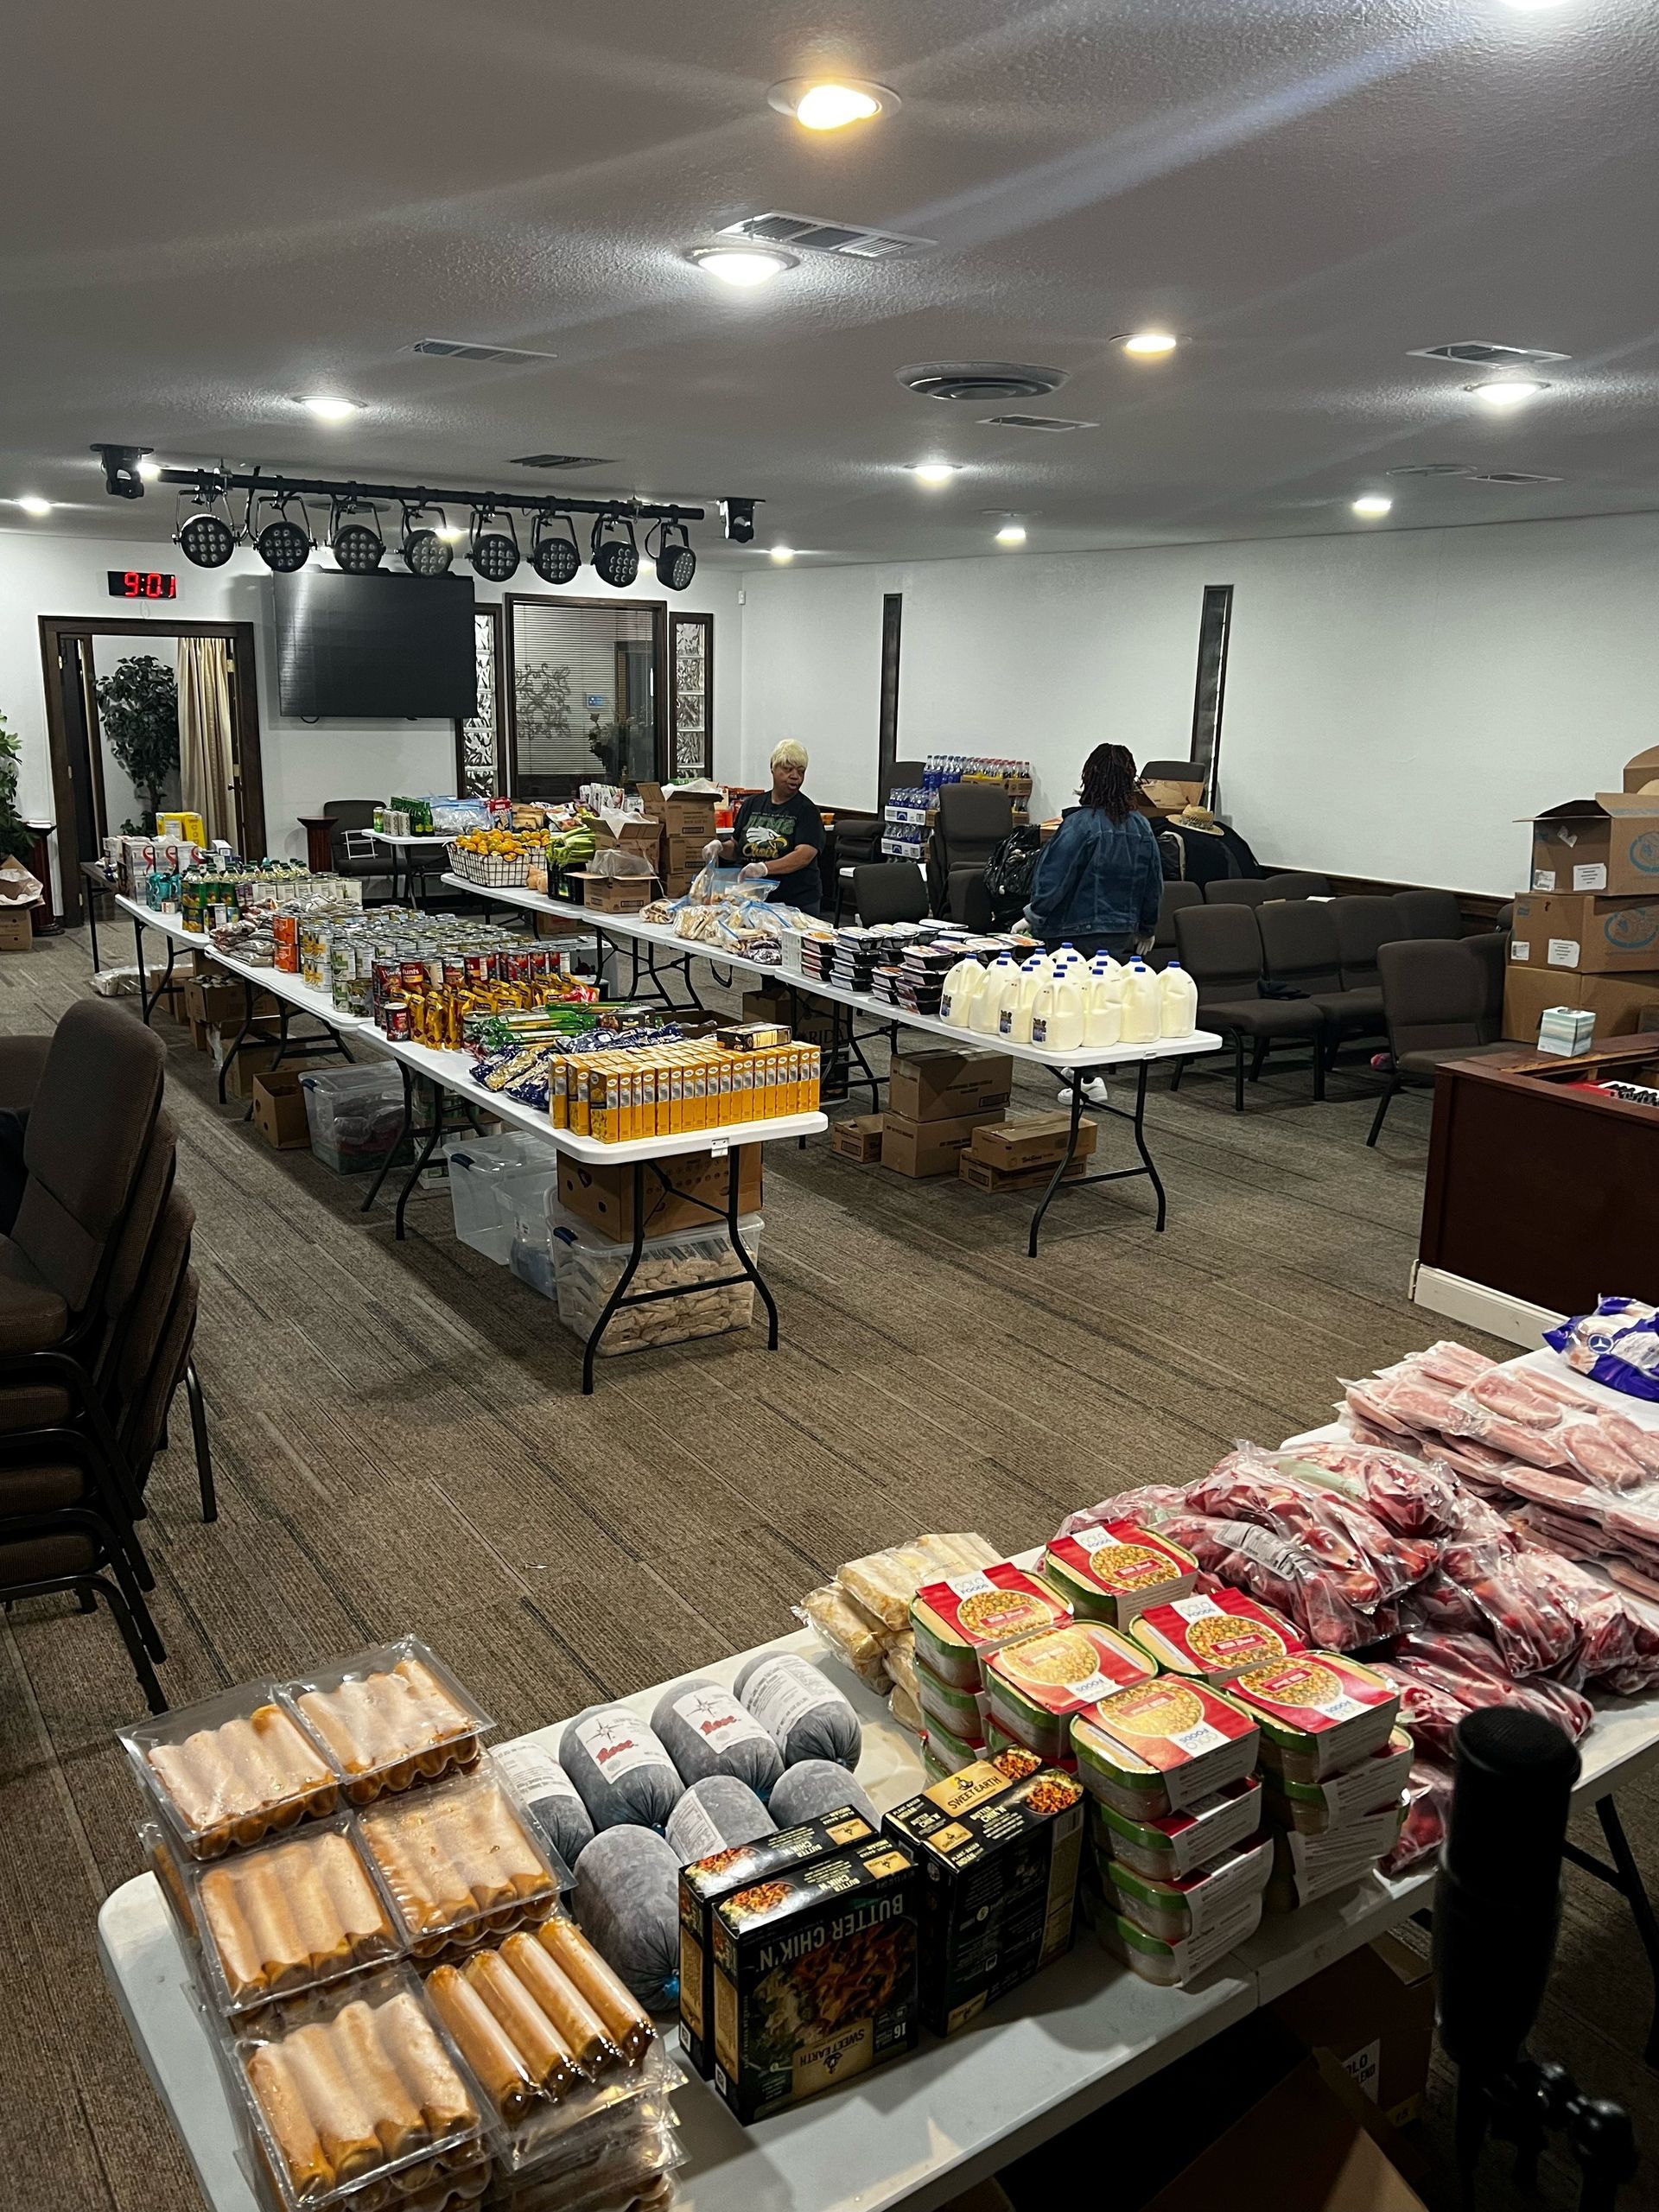 A large room filled with tables and boxes of food. - Lancaster, TX - International Harvest Fellowship Ministries